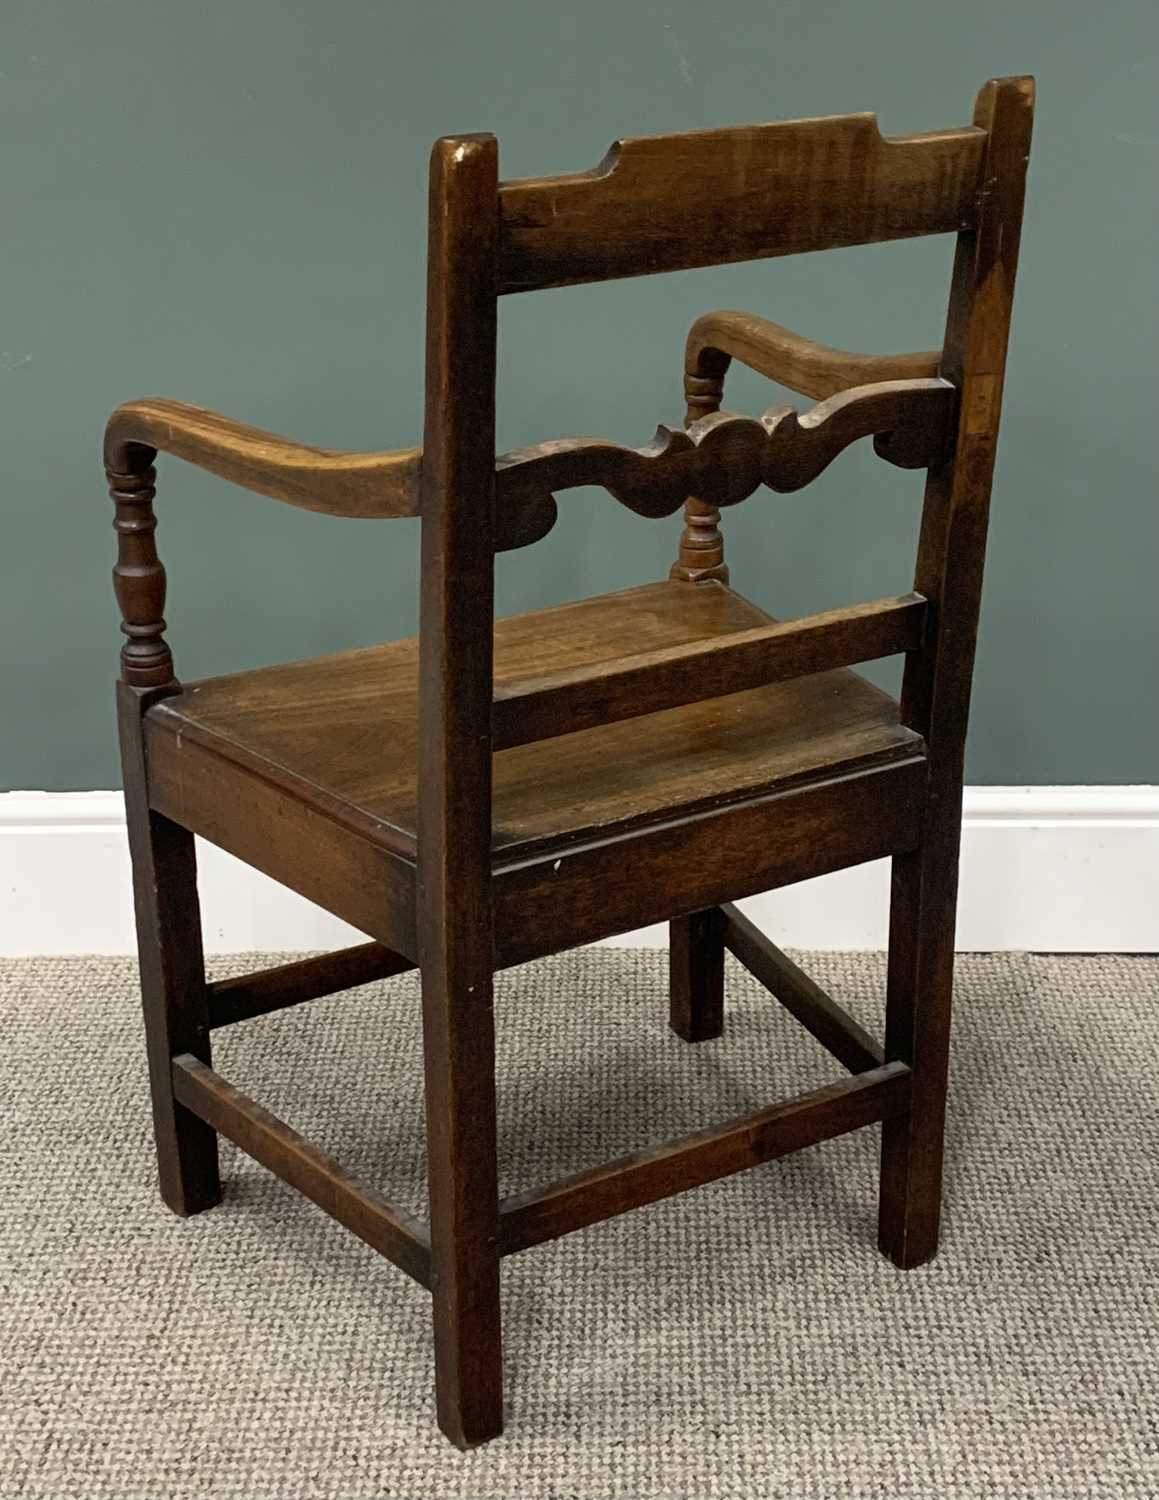 PEG JOINED MAHOGANY ANTIQUE FARMHOUSE ARMCHAIR, circa 1820, with a shaped central back rail and - Image 3 of 3